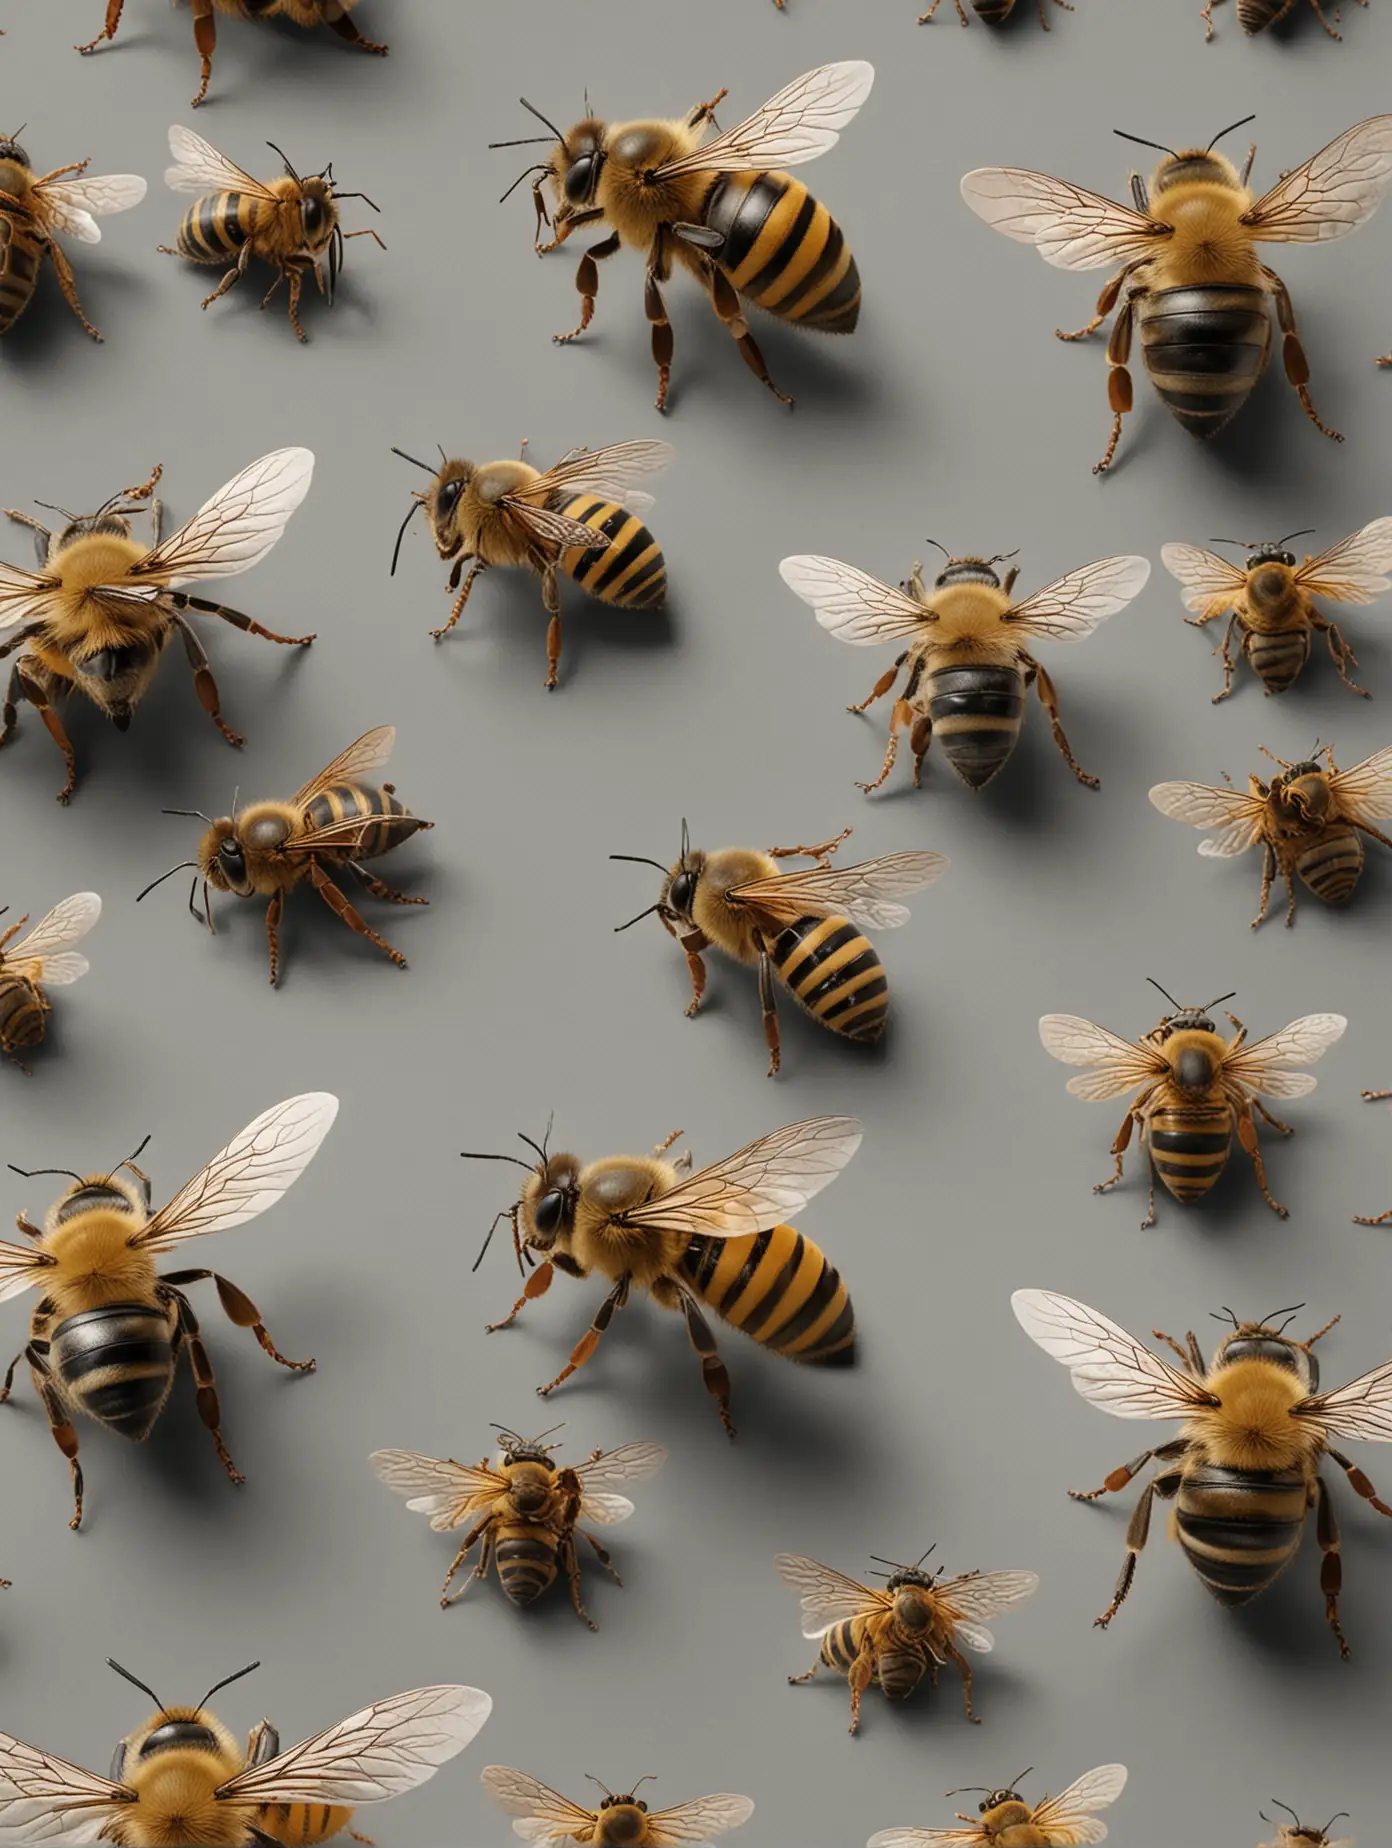 several anatomically correct, photorealistic bees occupy the scene, with a neutral gray background.